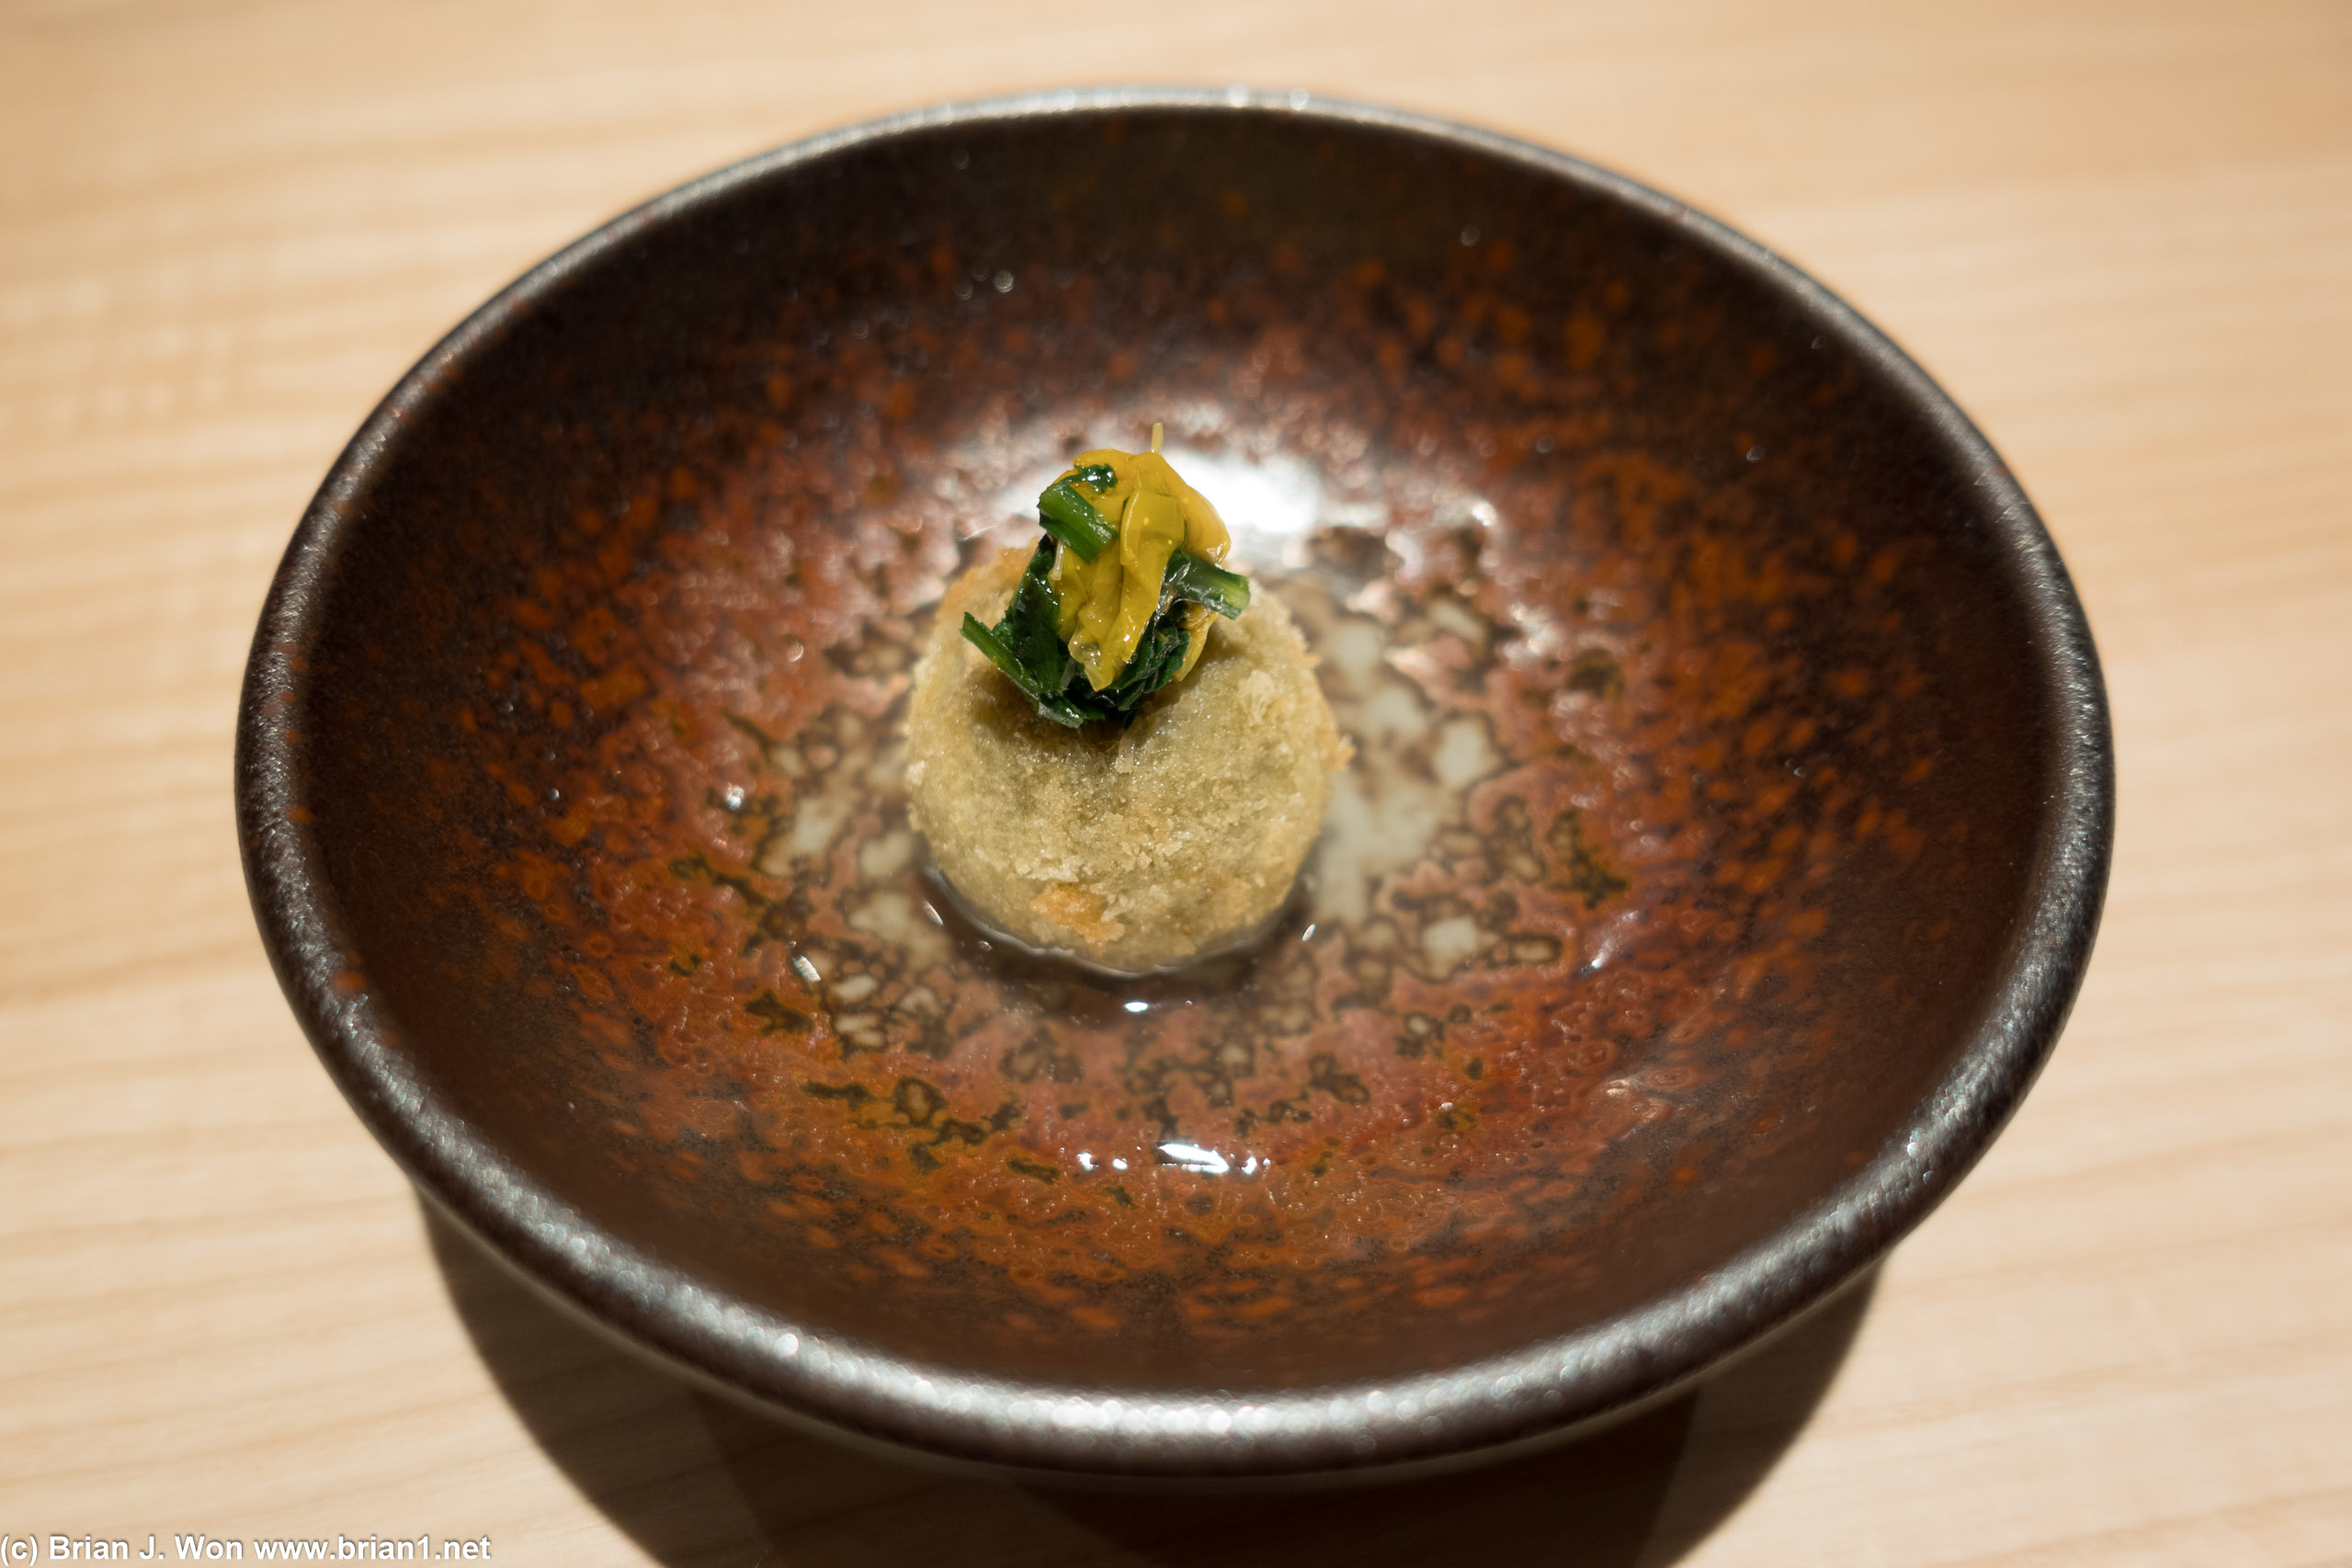 Fried oyster with chrysanthemum, bonito broth.